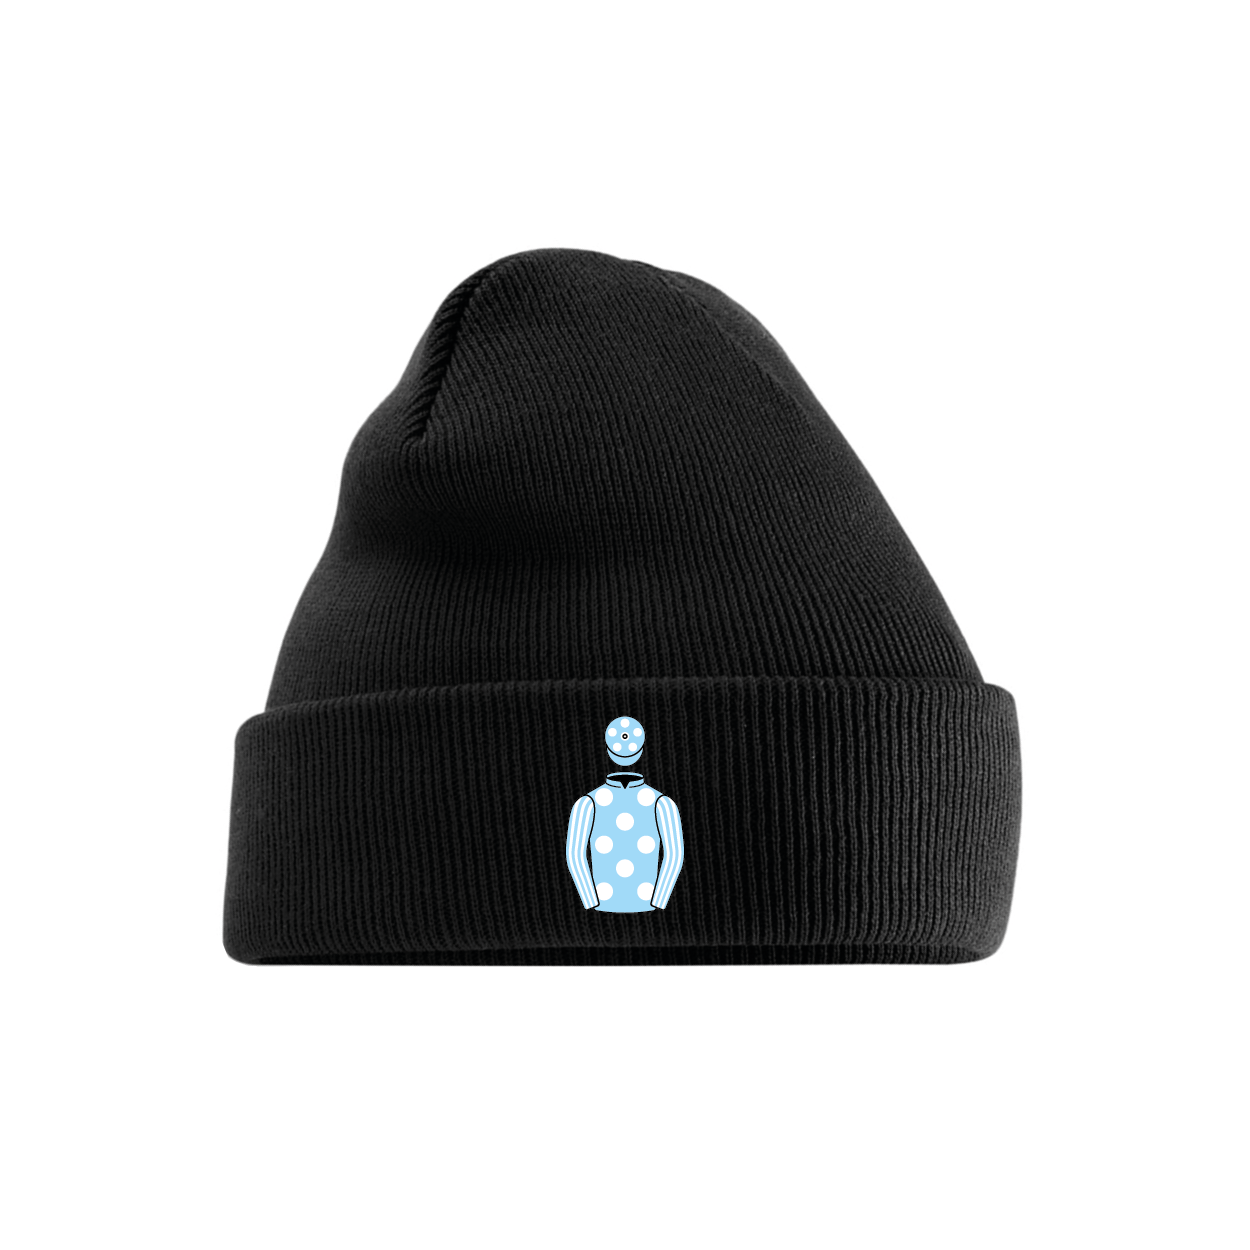 Kenneth Alexander Embroidered Cuffed Beanie - Hacked Up